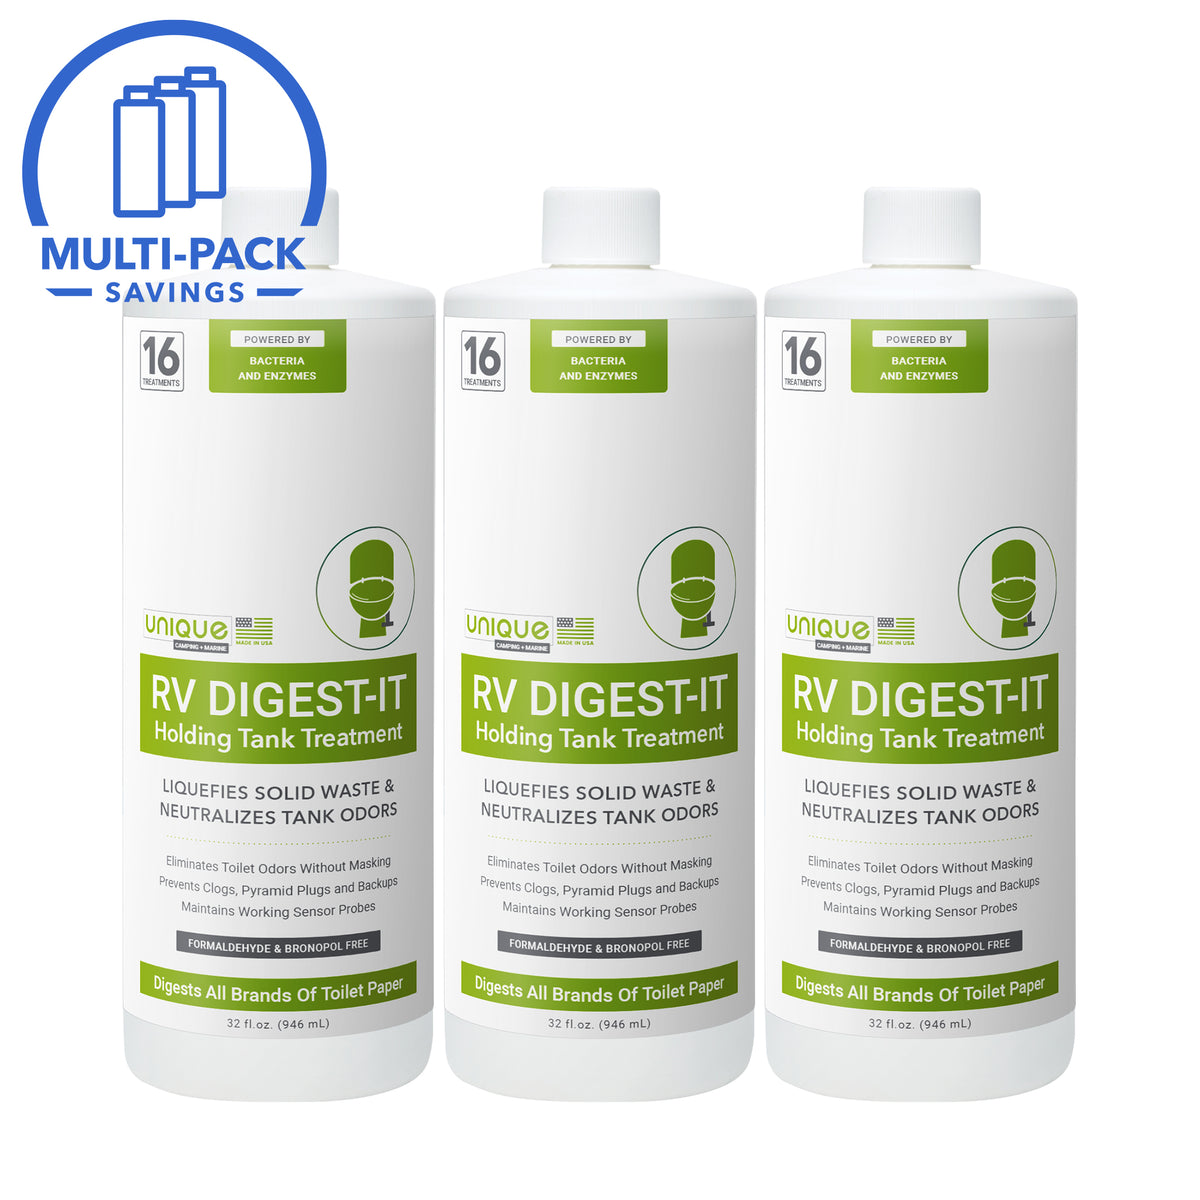 RV Digest-It 3 Pack 32 oz.. The best RV holding tank treatment. RV Digest-It is the most advanced holding tank treatment available with the most effective bacteria and enzyme strains. Digests solid waste, removes odors, and maintains working sensor probes.